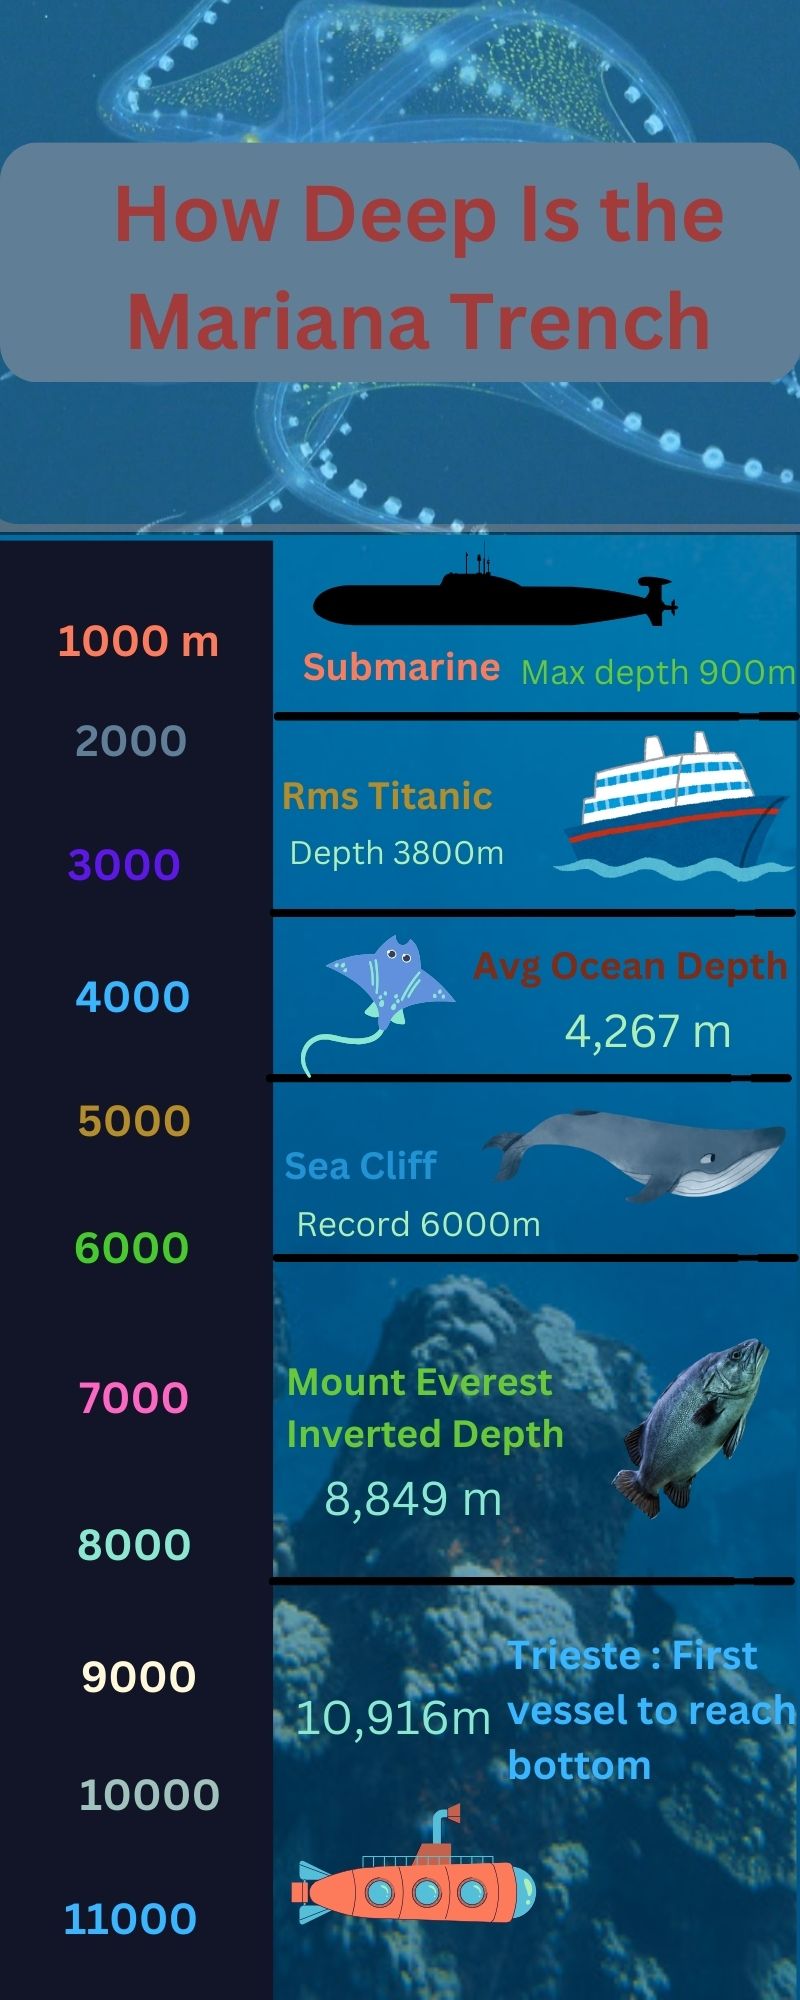 How Deep Is the Mariana Trench?